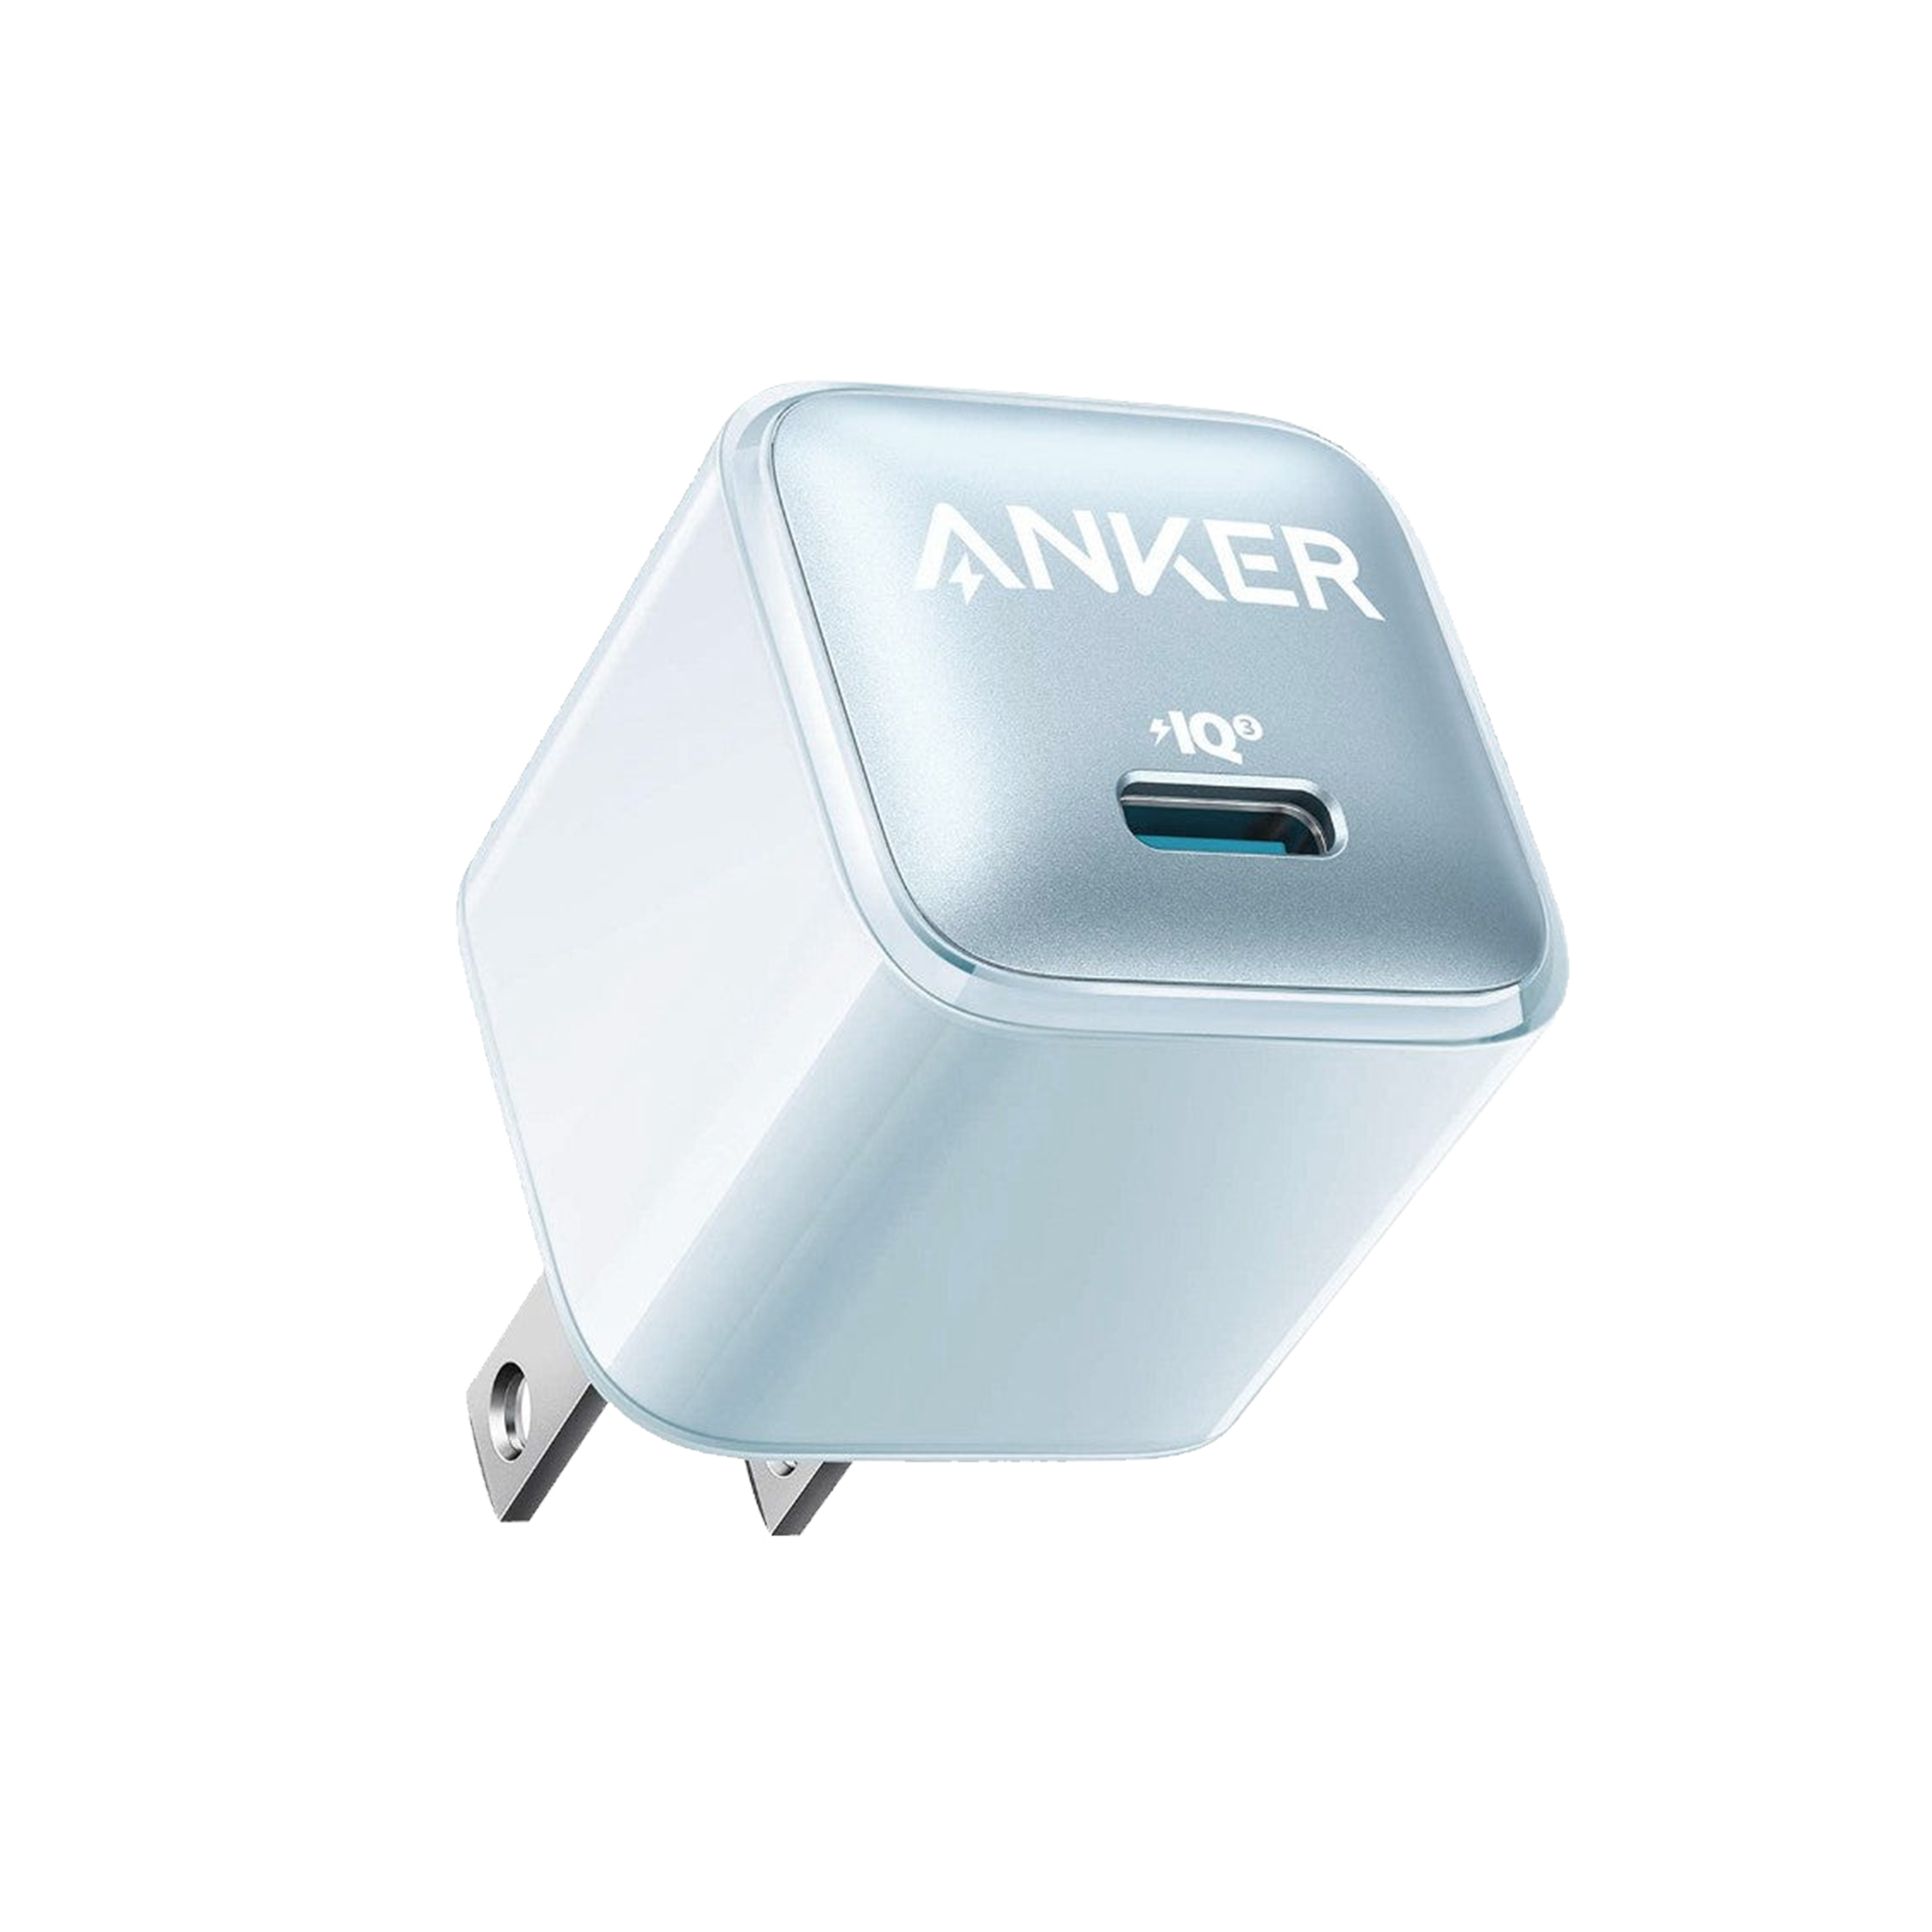 Anker 20W USB C Fast Charger with Foldable Plug, PowerPort III 20W Cube  Charger, 1 Pack (Cable Not Included) 